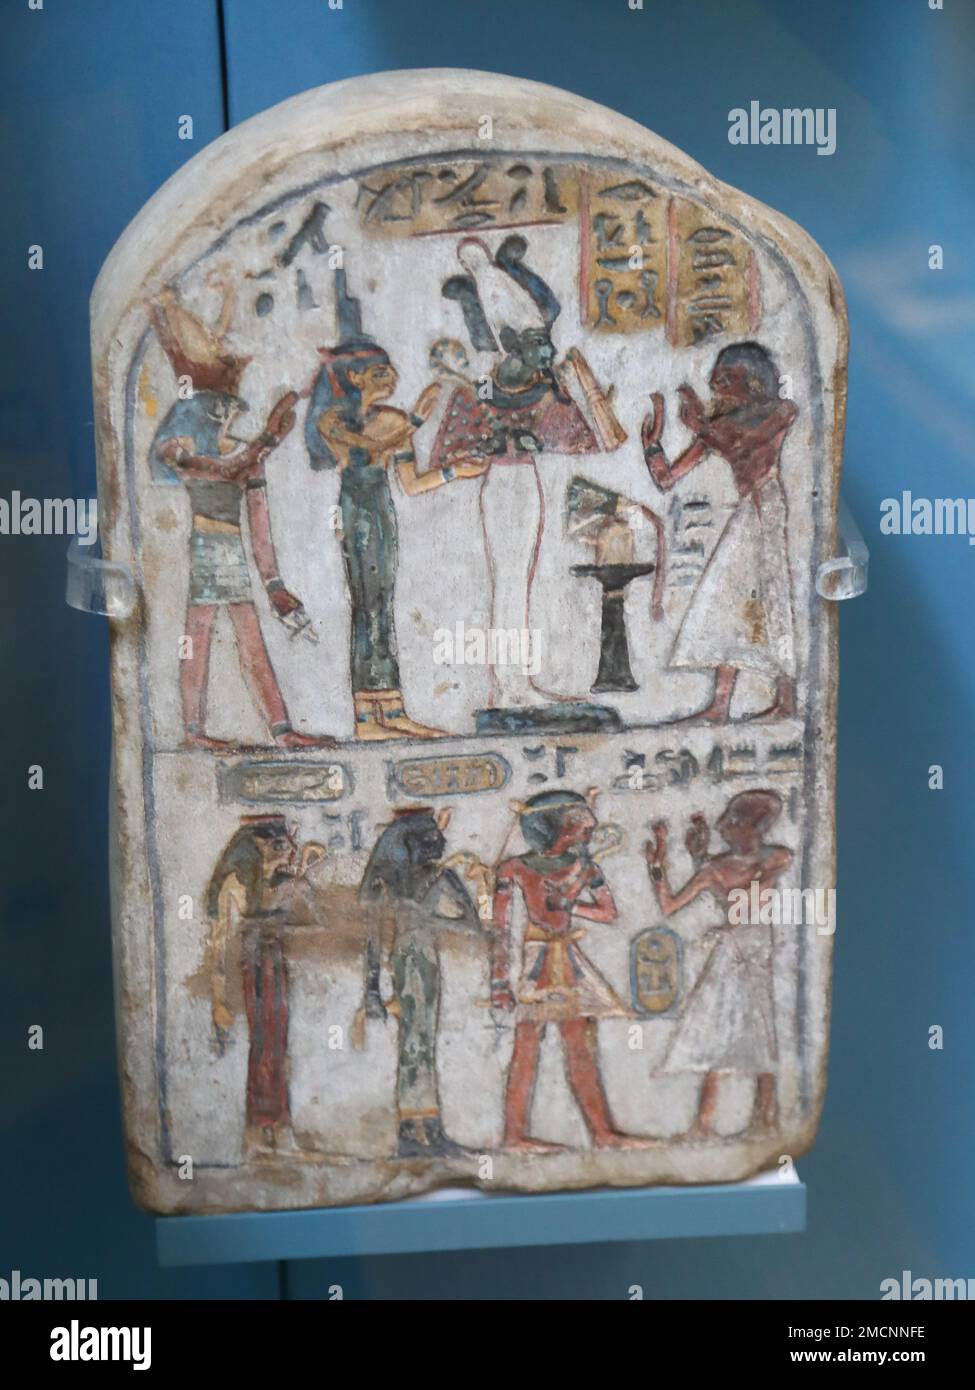 Egyptian painted limestone stela showing adoration of deceased members of the 18th Dynasty royal family at the British Museum, London, UK Stock Photo